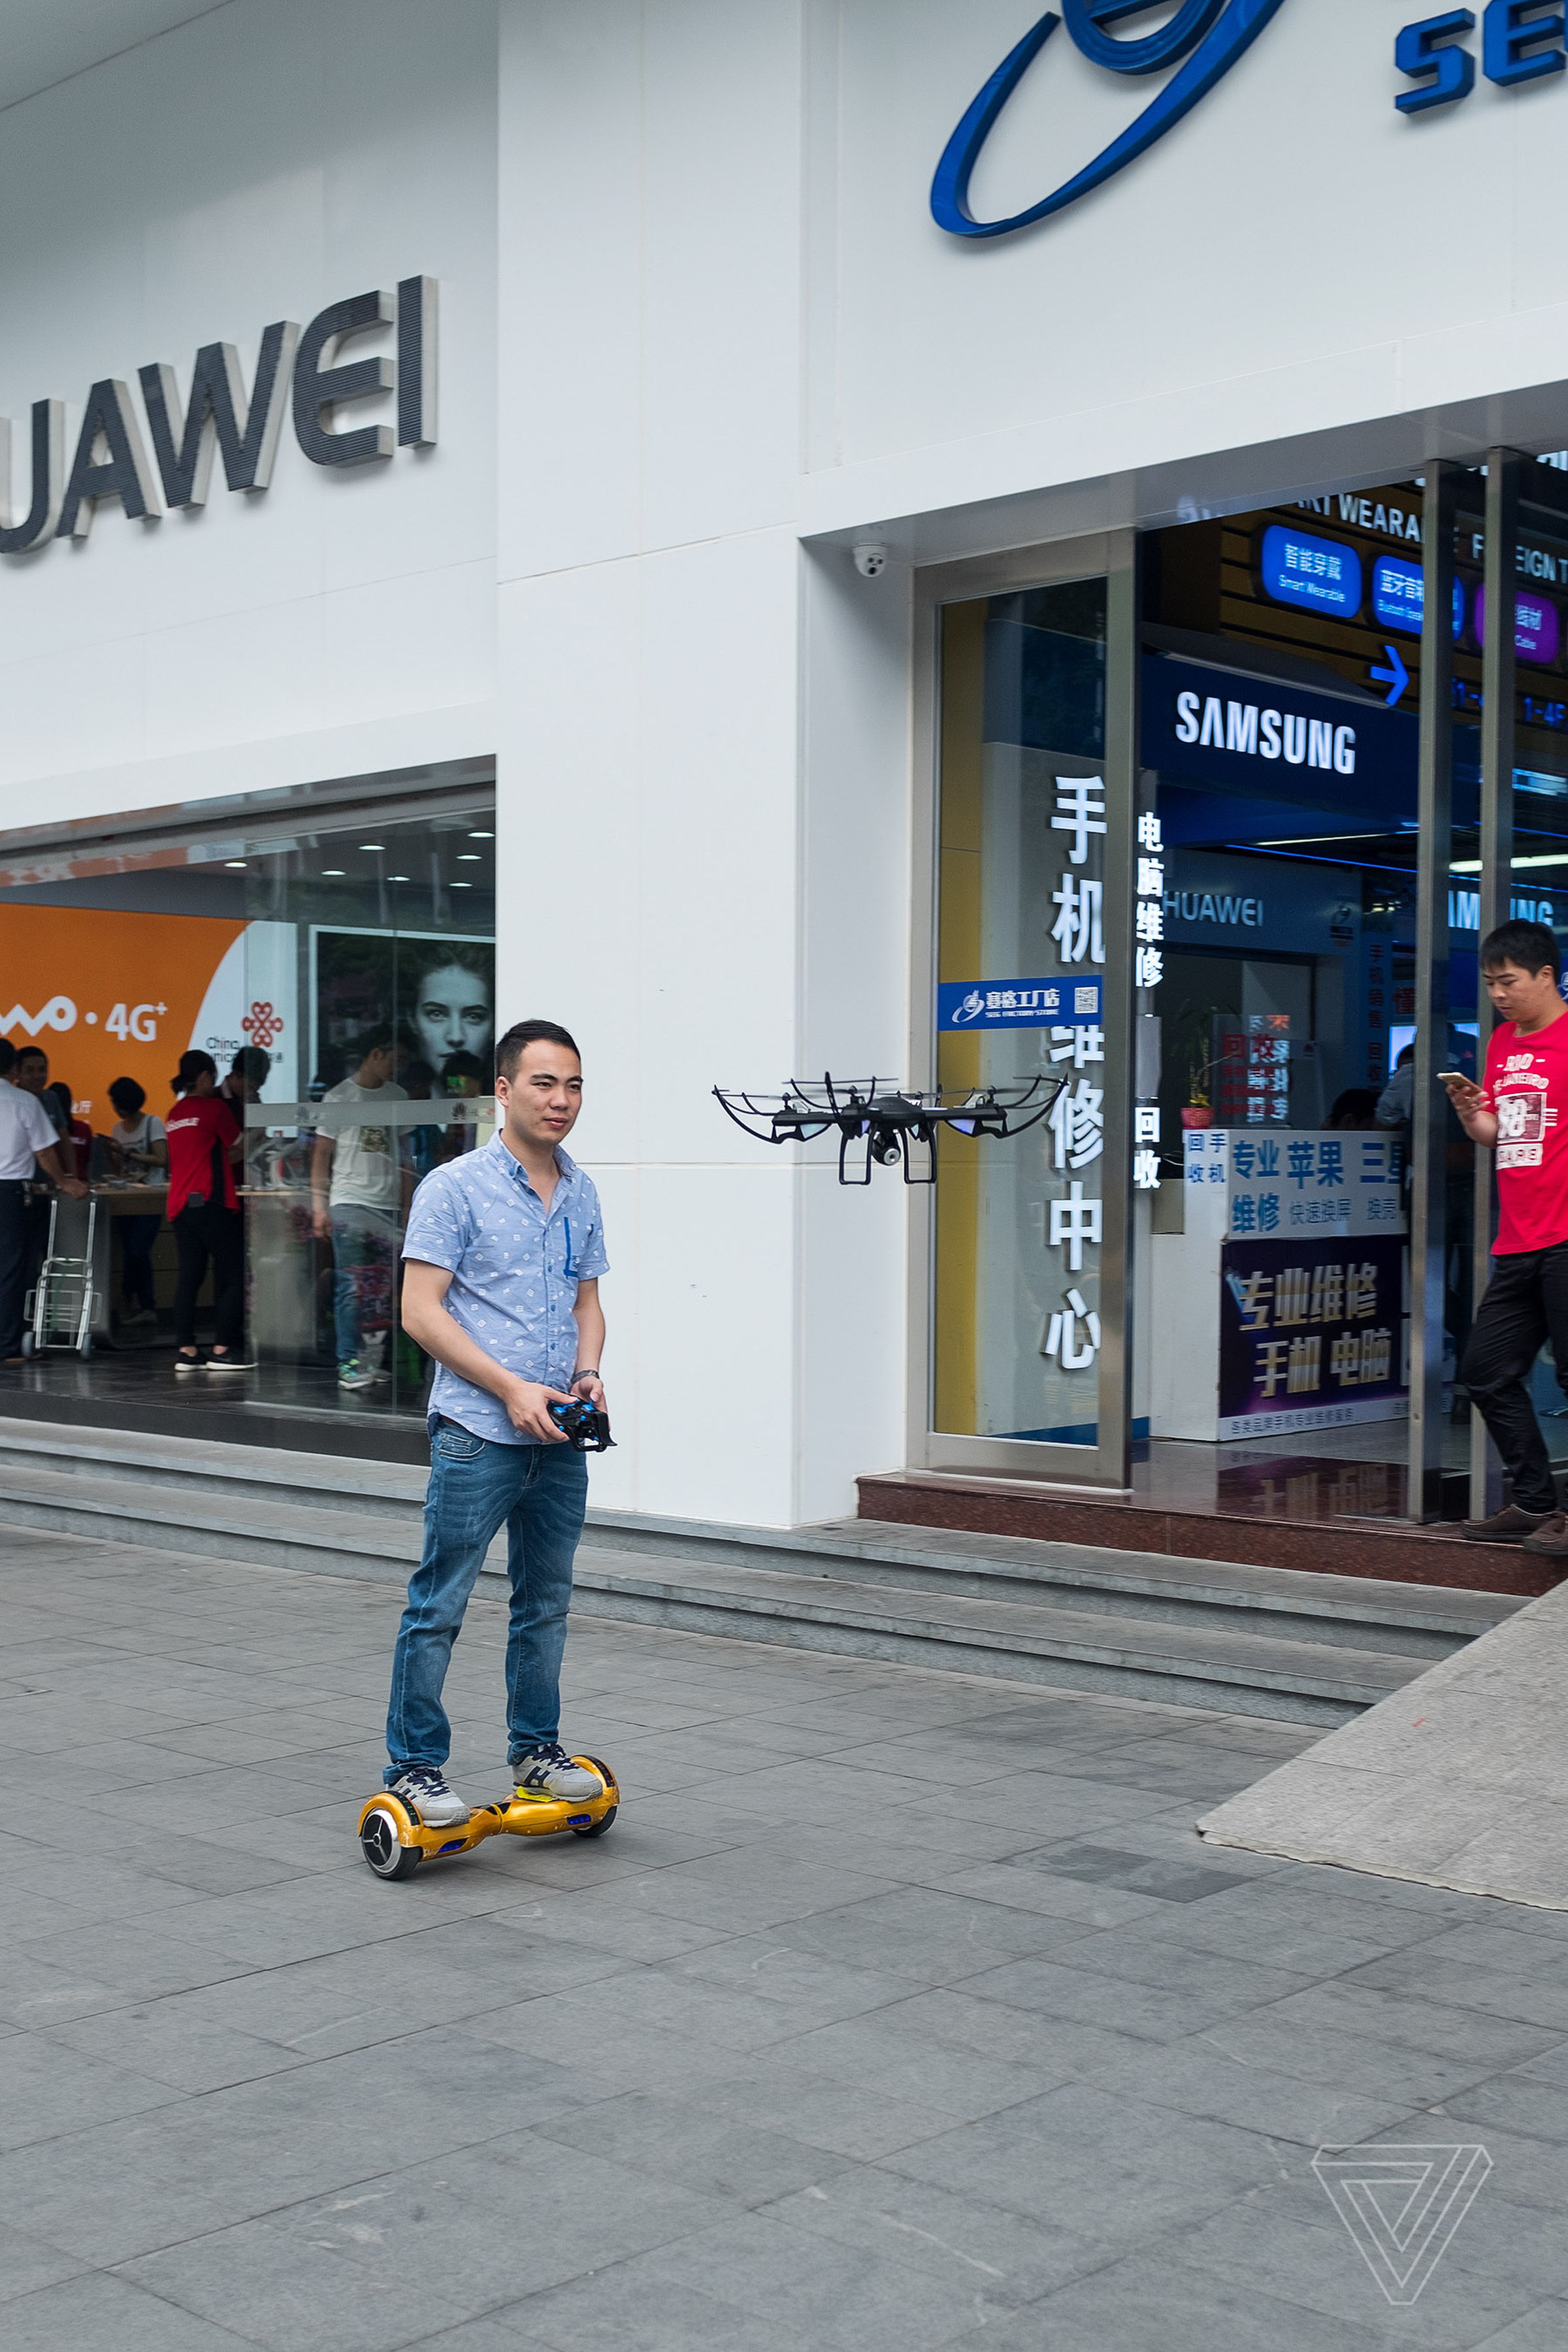 A man demonstrates a hoverboard and a drone outside of a shop in Shenzhen.